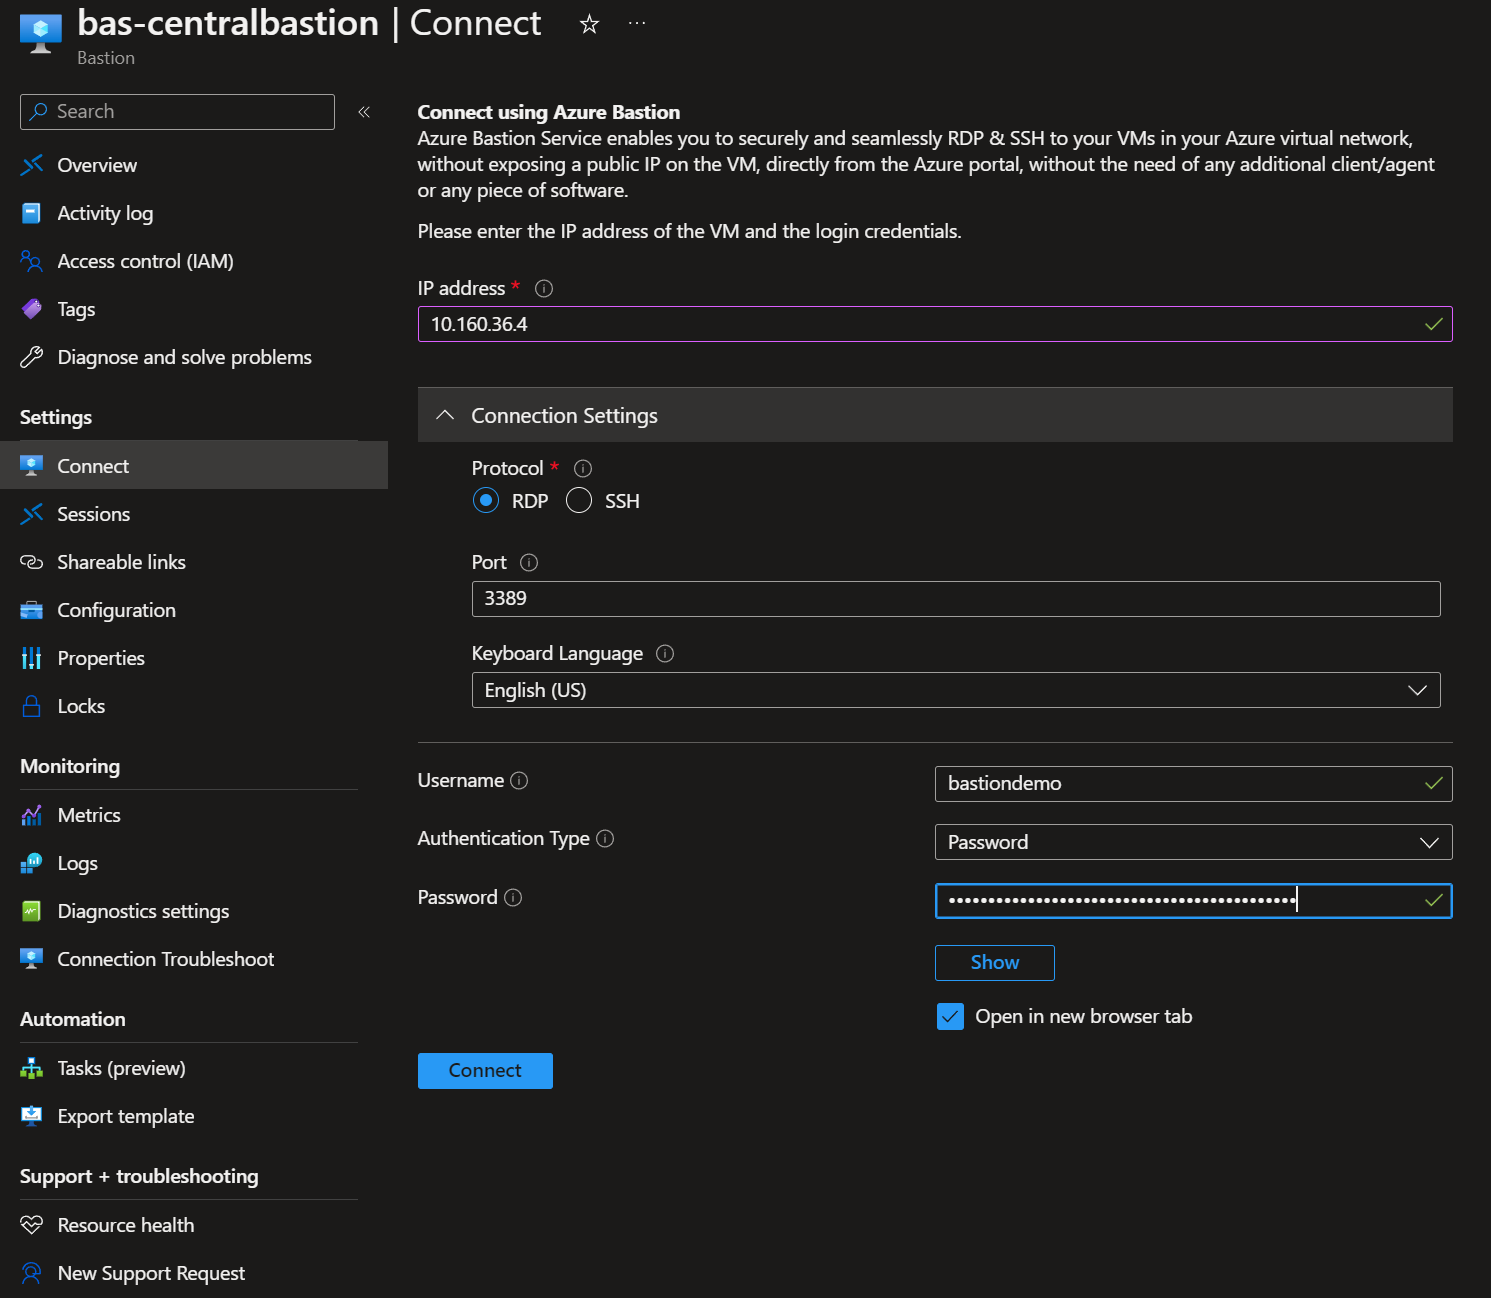 Using Bastion IP-based connection in the Azure portal